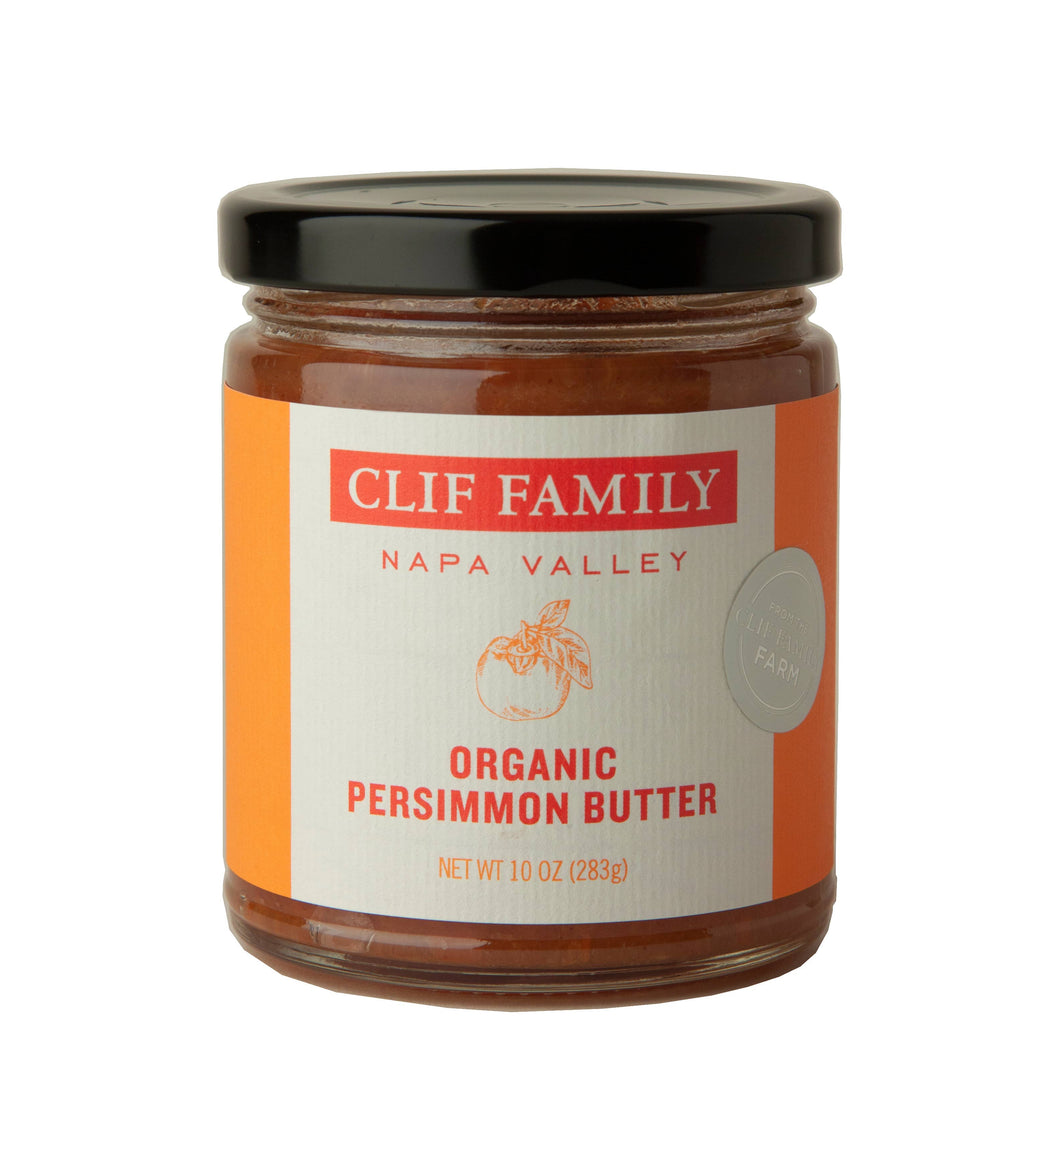 Clif Family Napa Valley - Organic Persimmon Butter